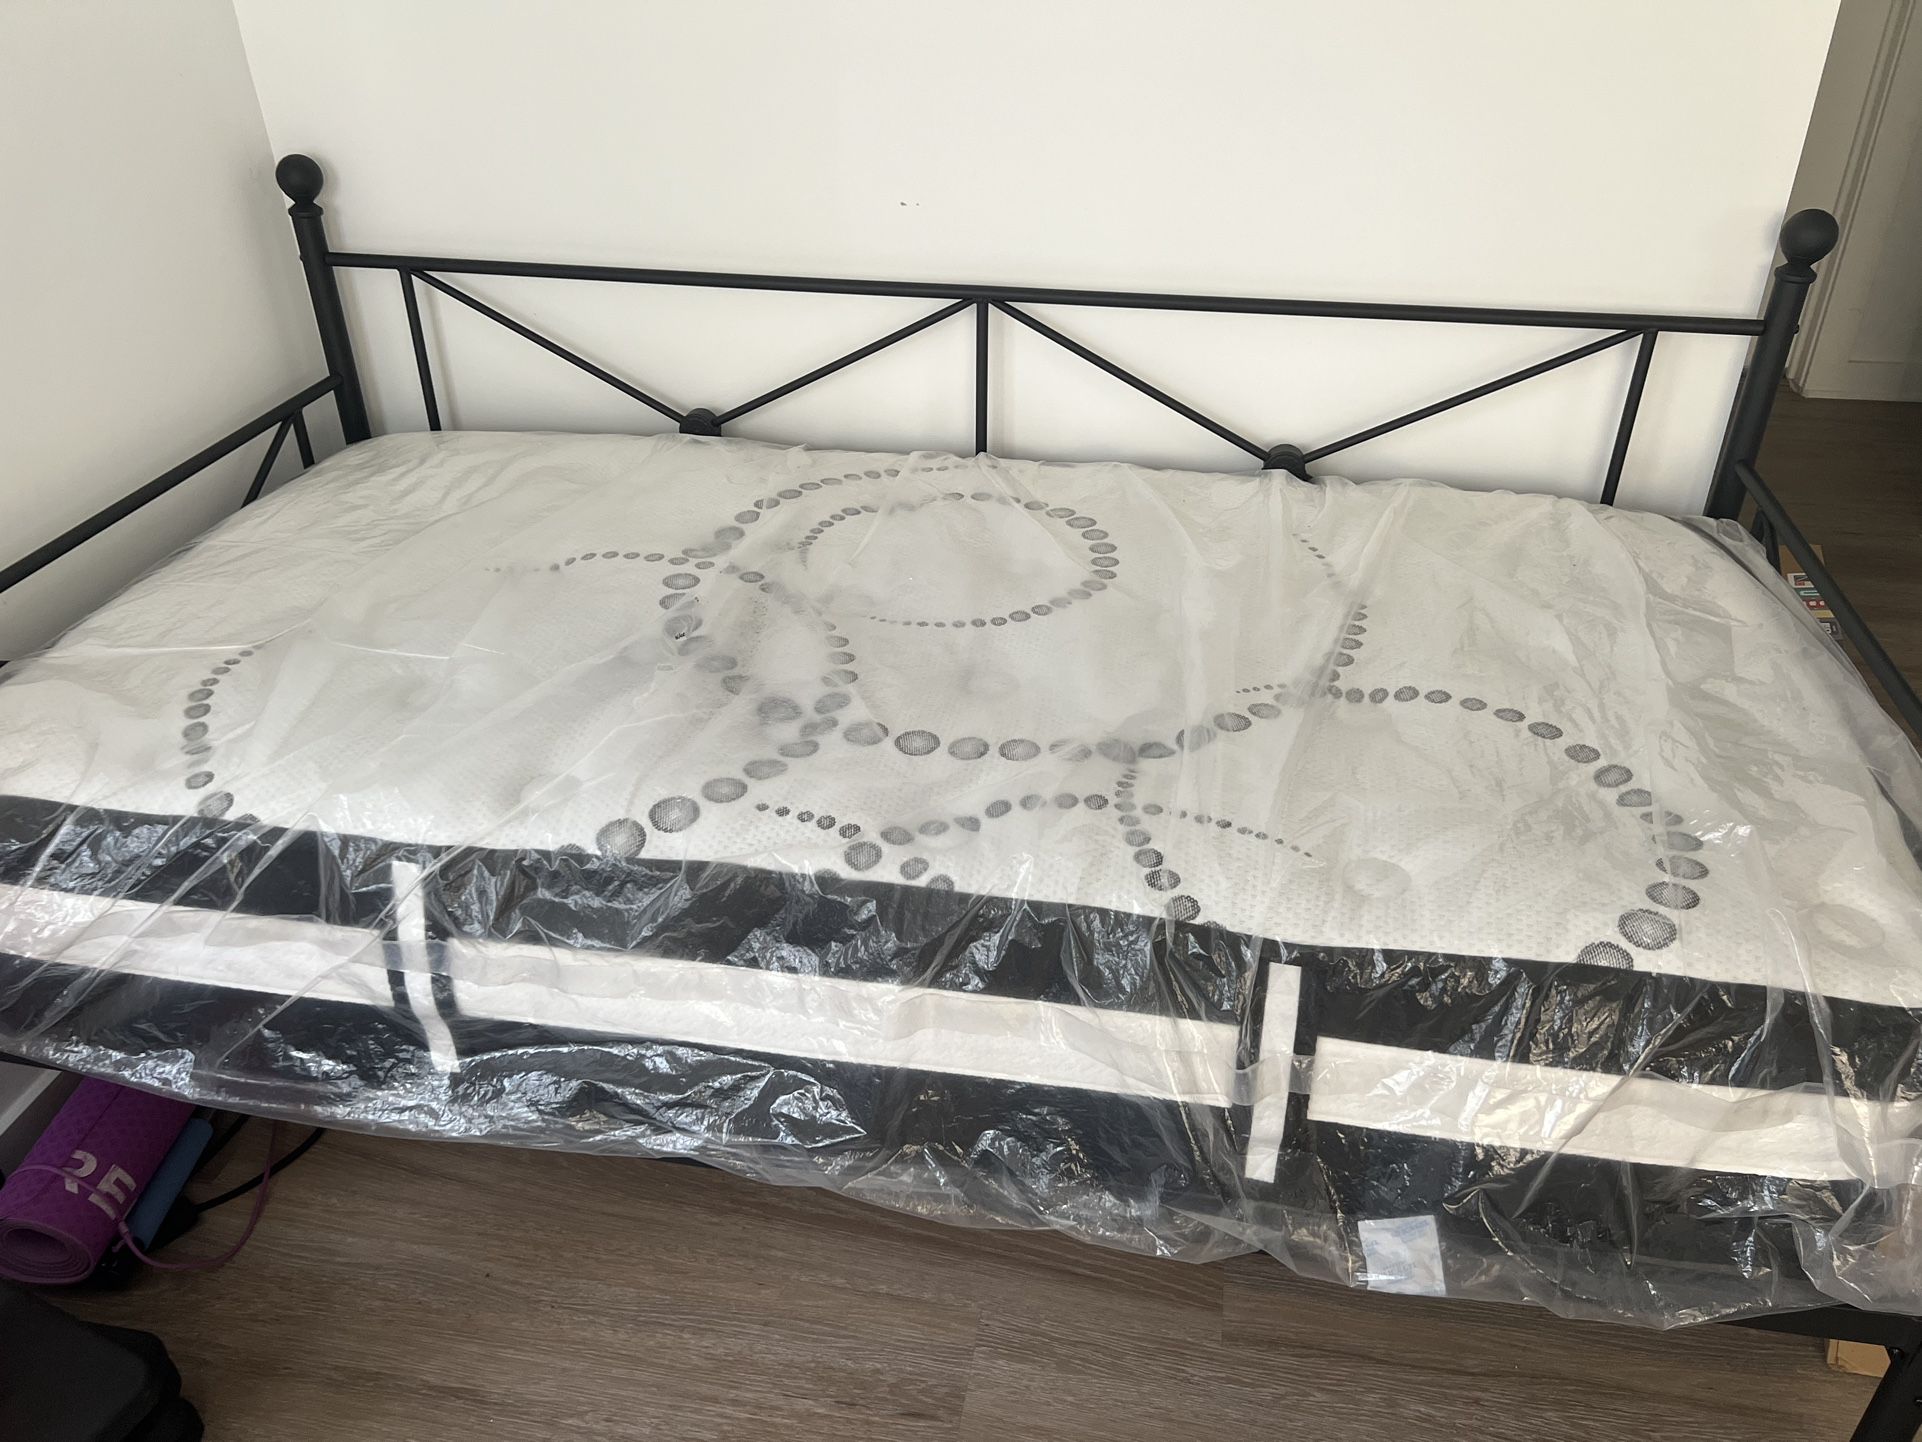 Metal Bed Frame And Mattress (twin Xl)